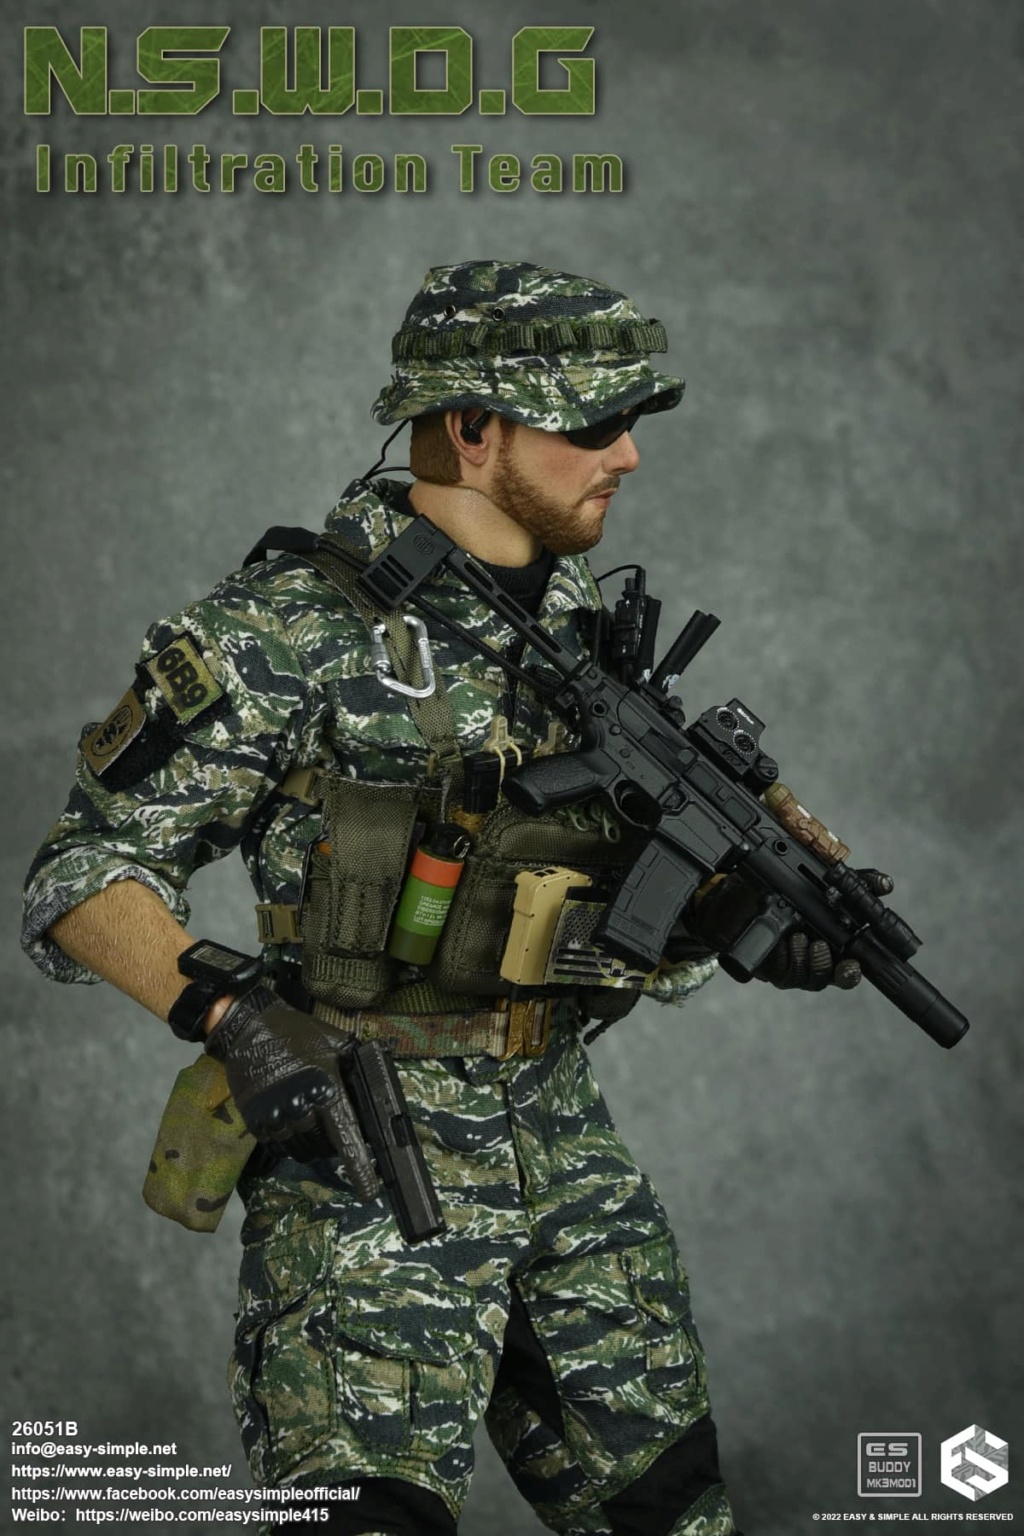 InfilitrationTeam - NEW PRODUCT: EASY AND SIMPLE 1/6 SCALE FIGURE: N.S.W.D.G INFILTRATION TEAM - (2 Versions) 10530